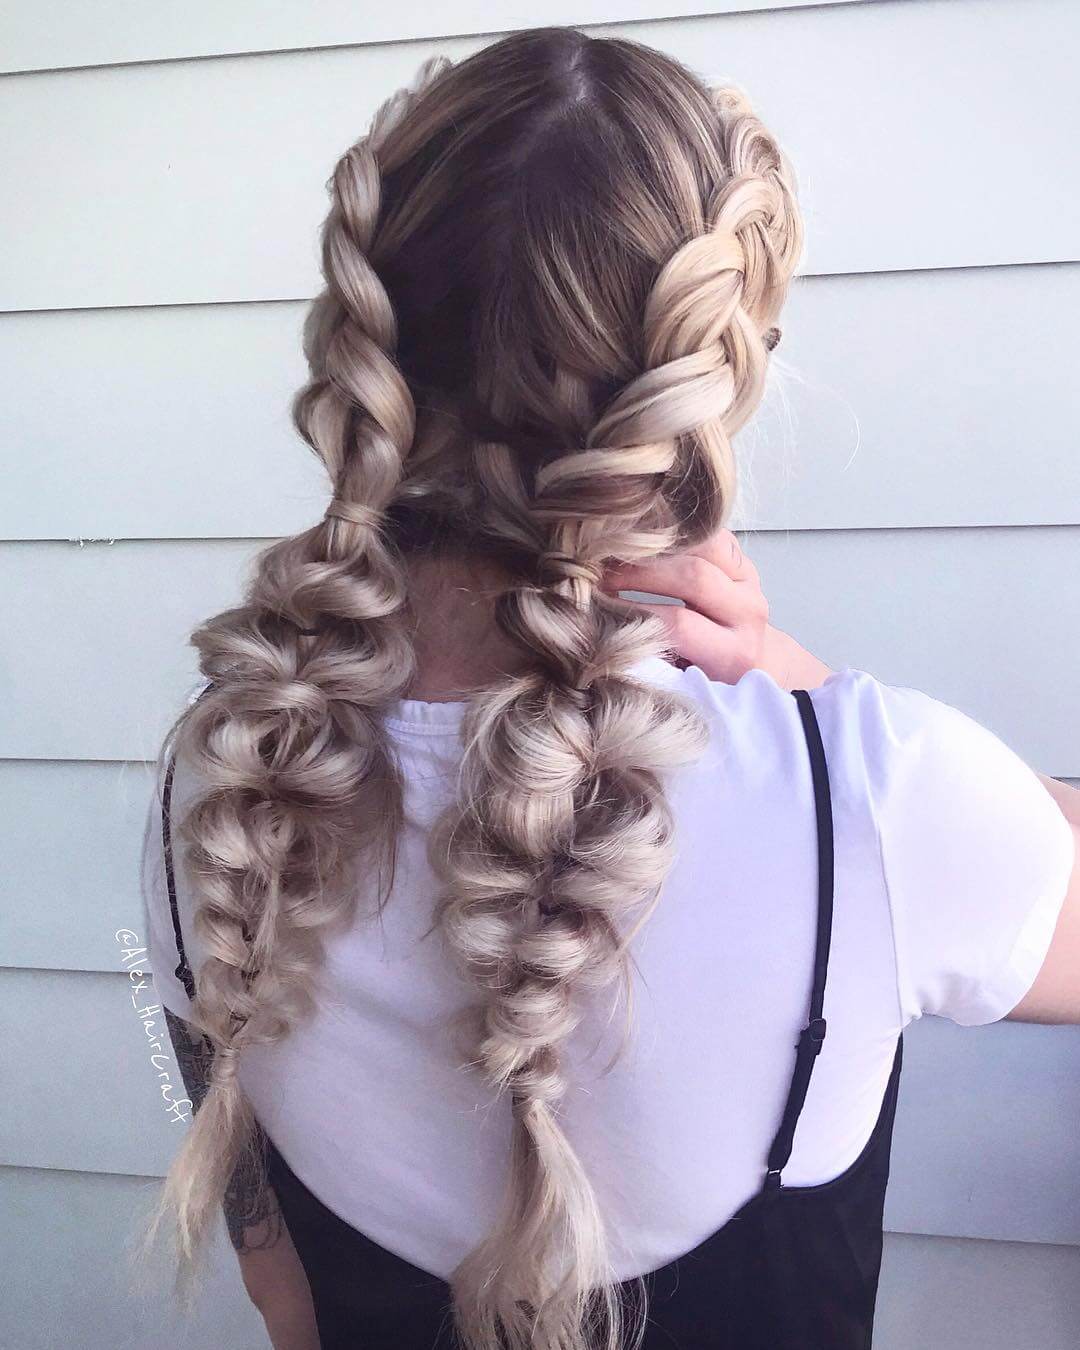 Messy pigtails braid hair style